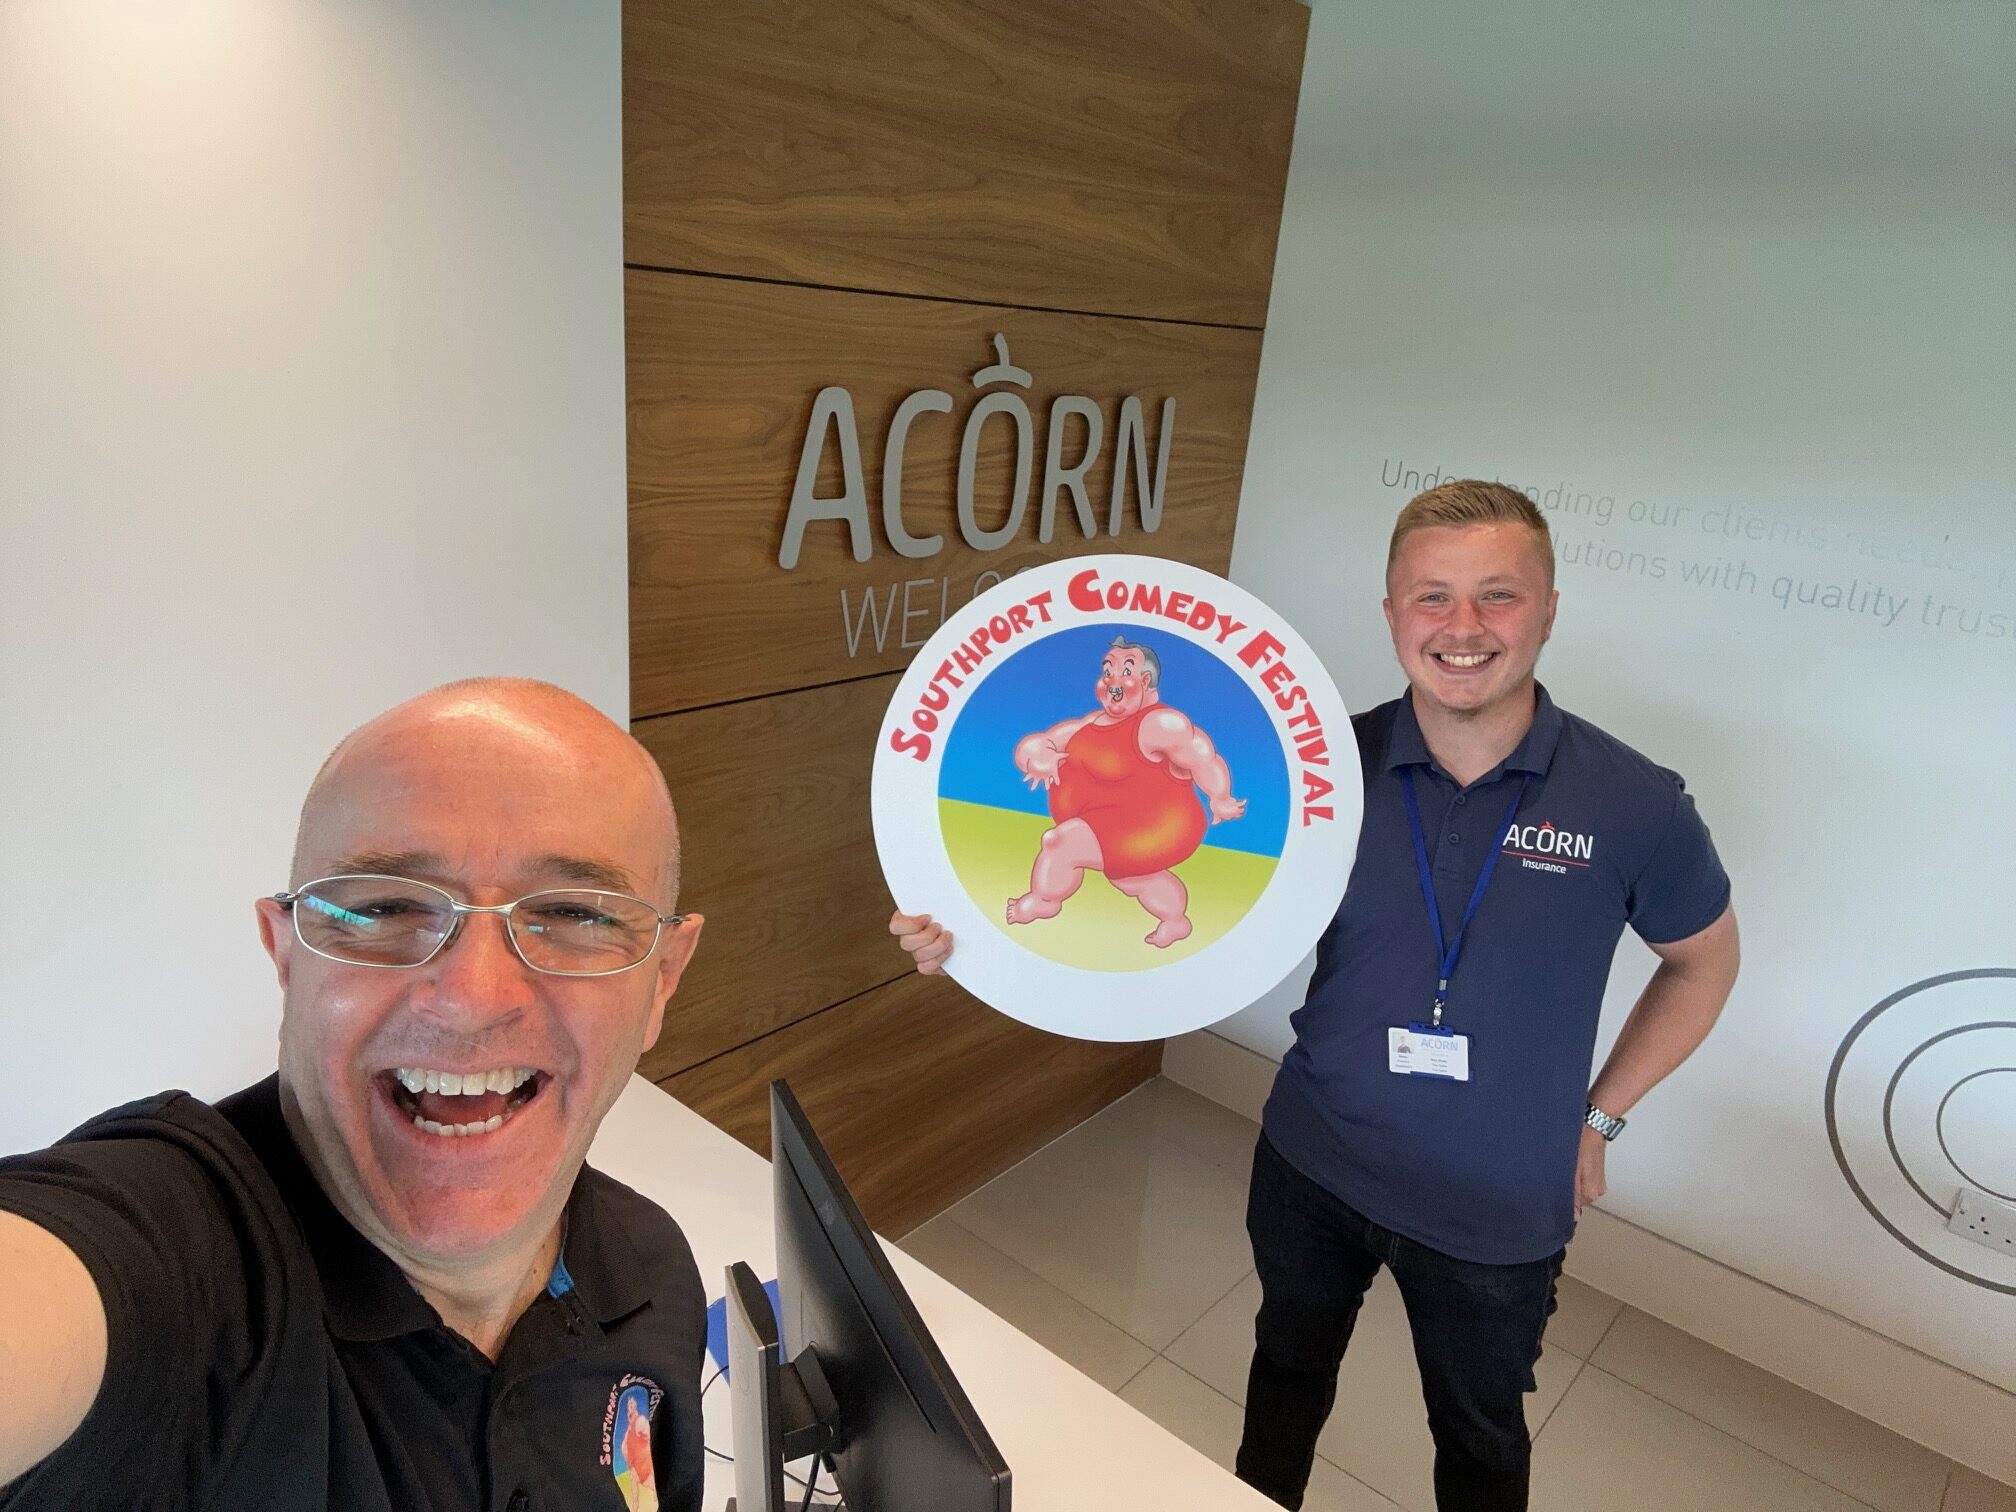 Acorn Insurance in Formby is supporting the 2023 Southport Comedy Festival 